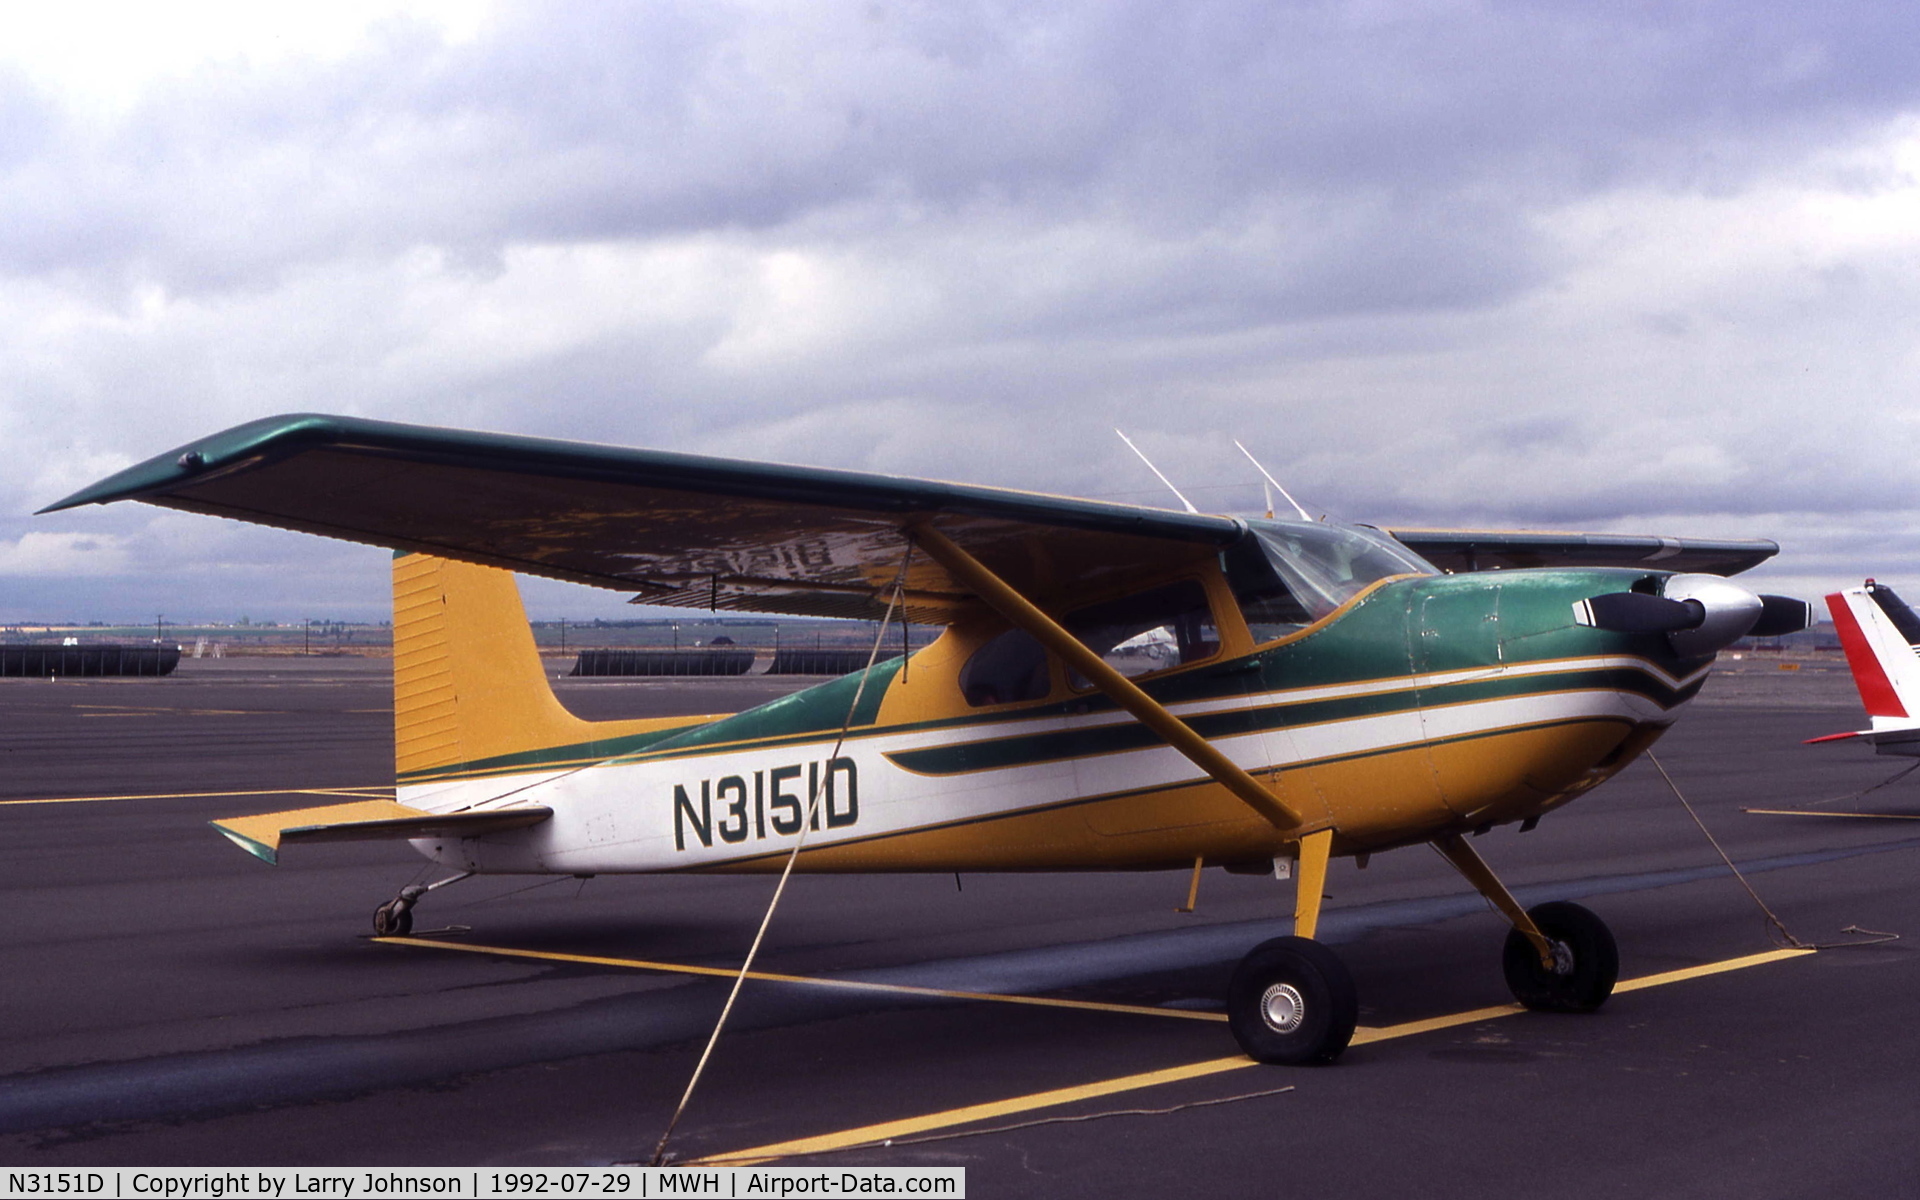 N3151D, 1955 Cessna 180 C/N 31949, This is a nice looking Cessna 180.